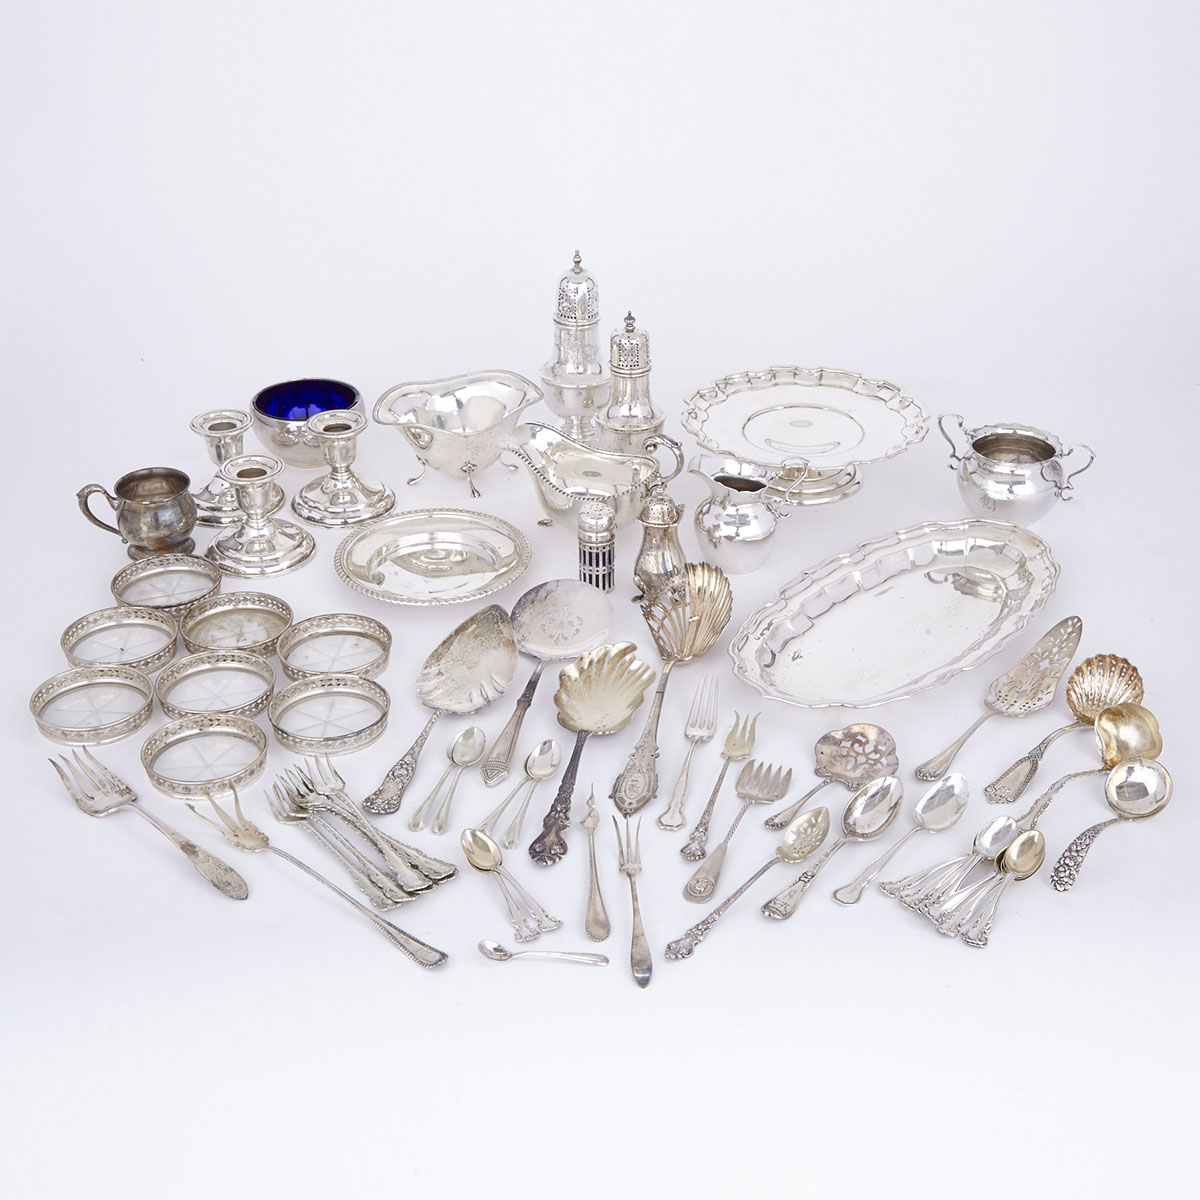 Grouped Lot of North American Silver, late 19th/20th century